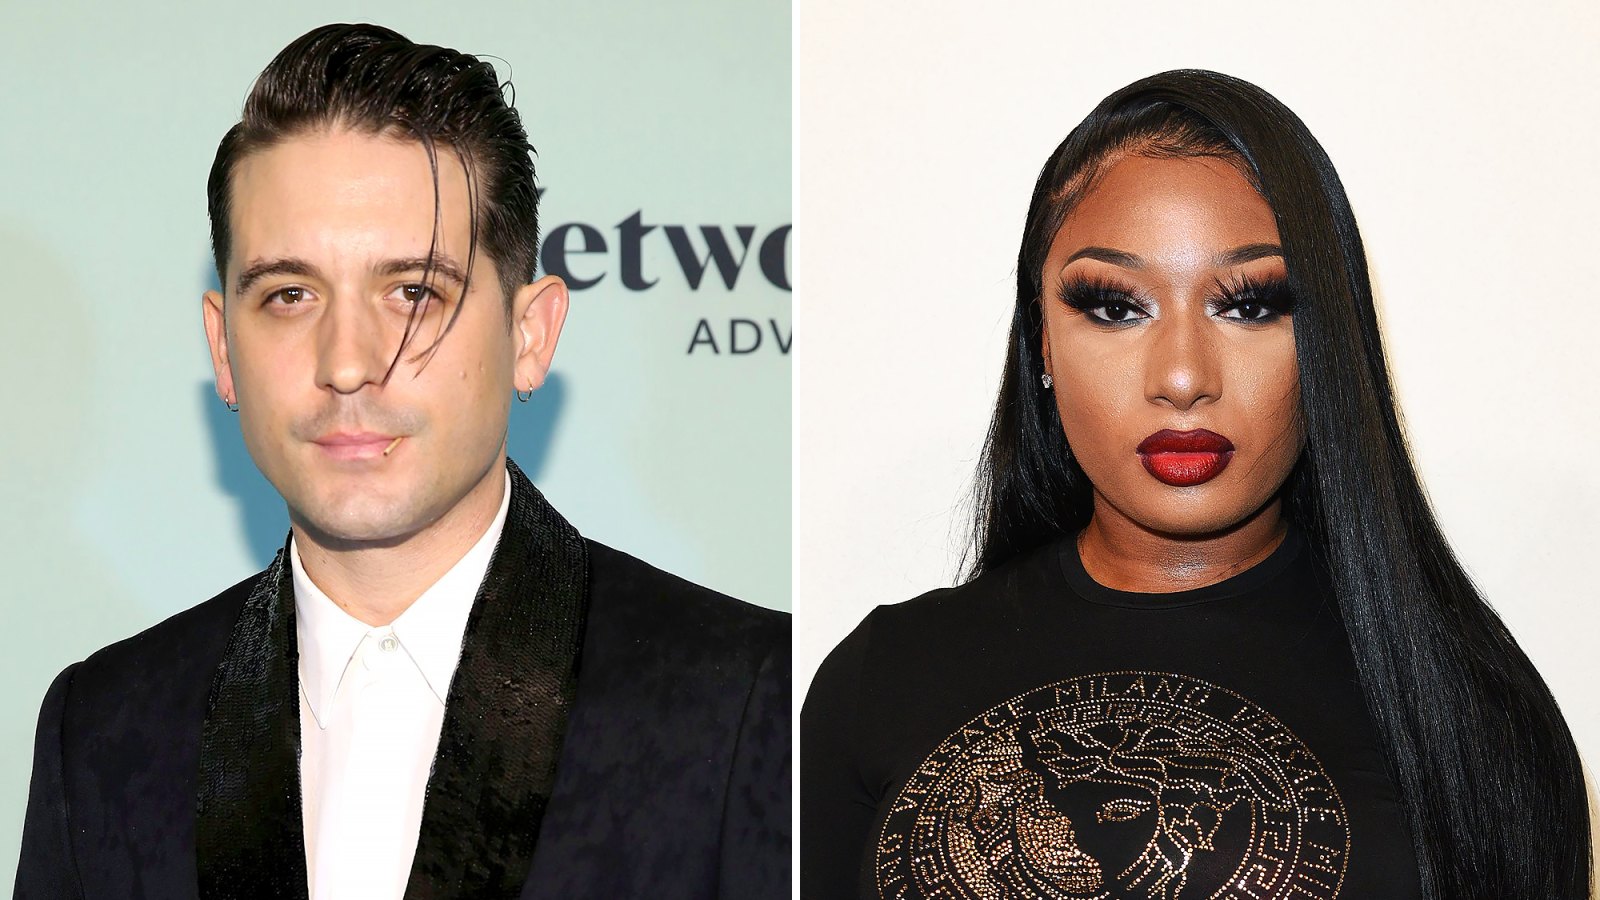 G-Eazy and Megan Thee Stallion Get Hot and Heavy in Super Bowl Sunday Videos